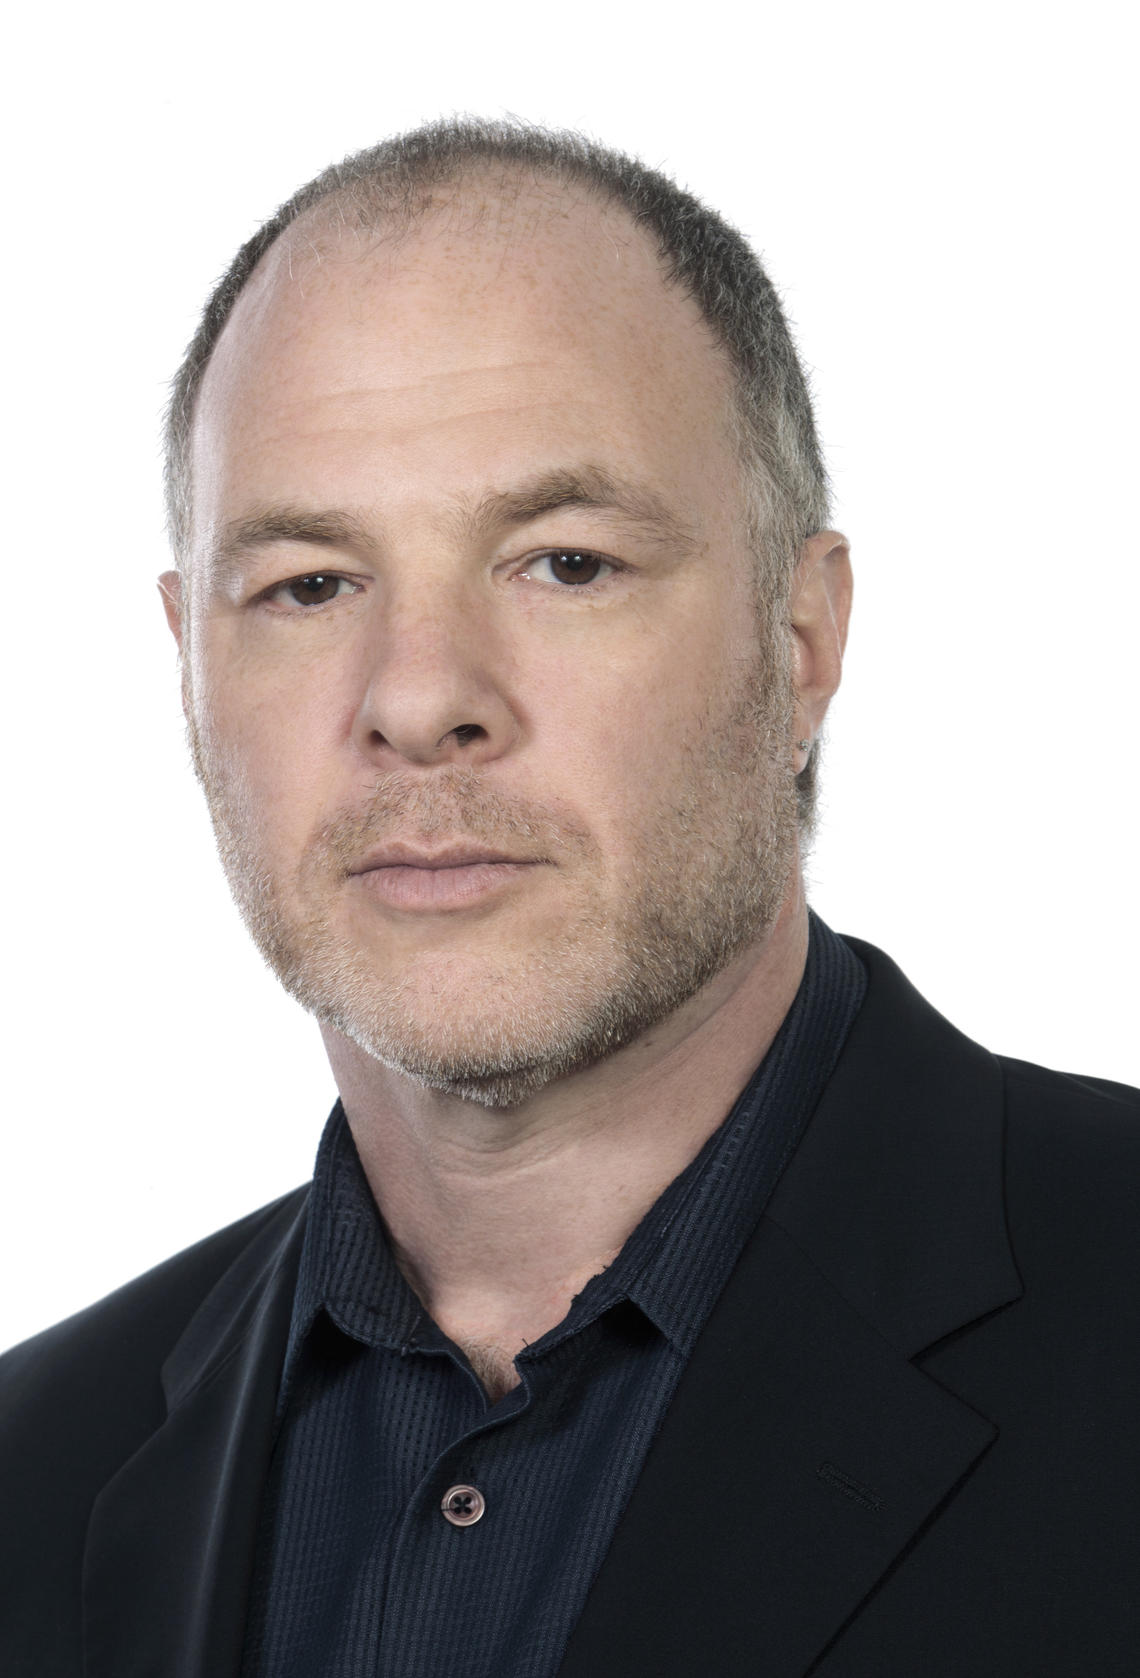 Jackson Katz is an educator, author, filmmaker and cultural theorist internationally renowned for his pioneering scholarship and activism on issues of gender, race and violence.